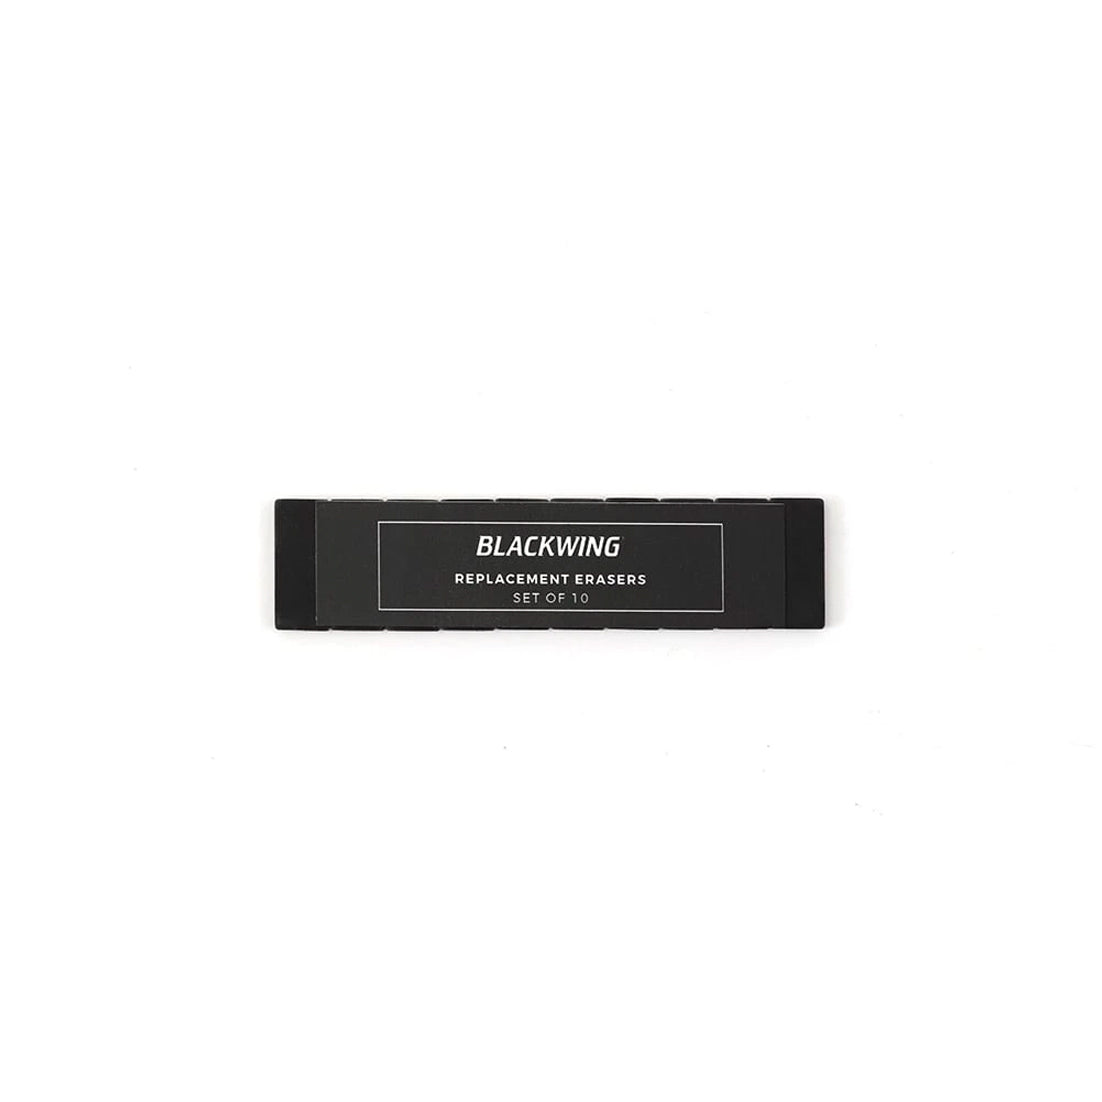 BLACKWING BLACK REPLACEMENT ERASERS